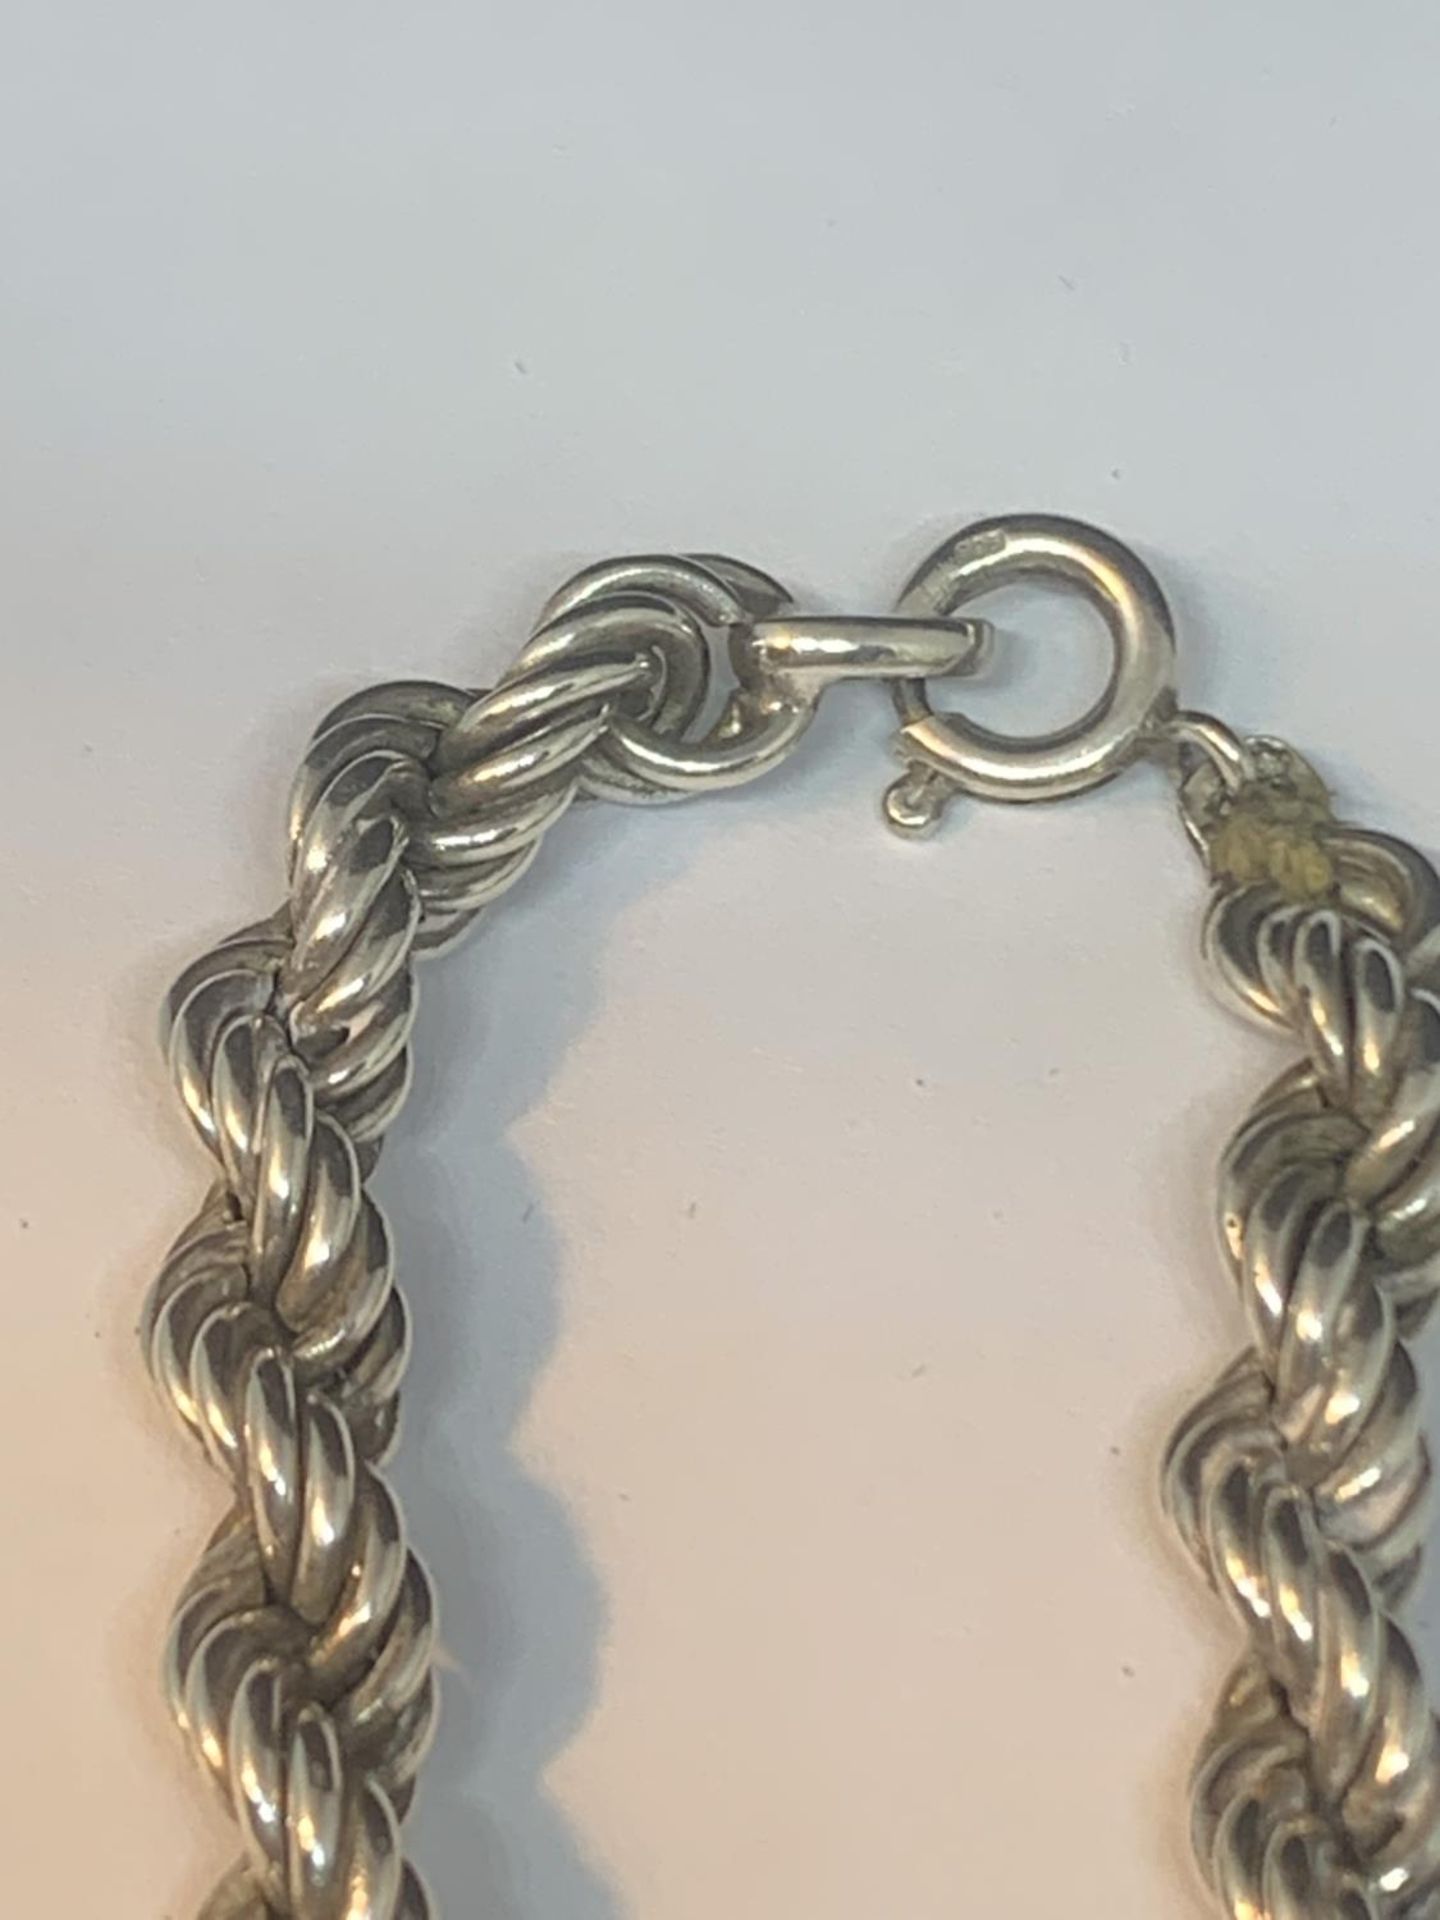 A THICK MARKED SILVER ROPE NECKLACE - Image 3 of 4